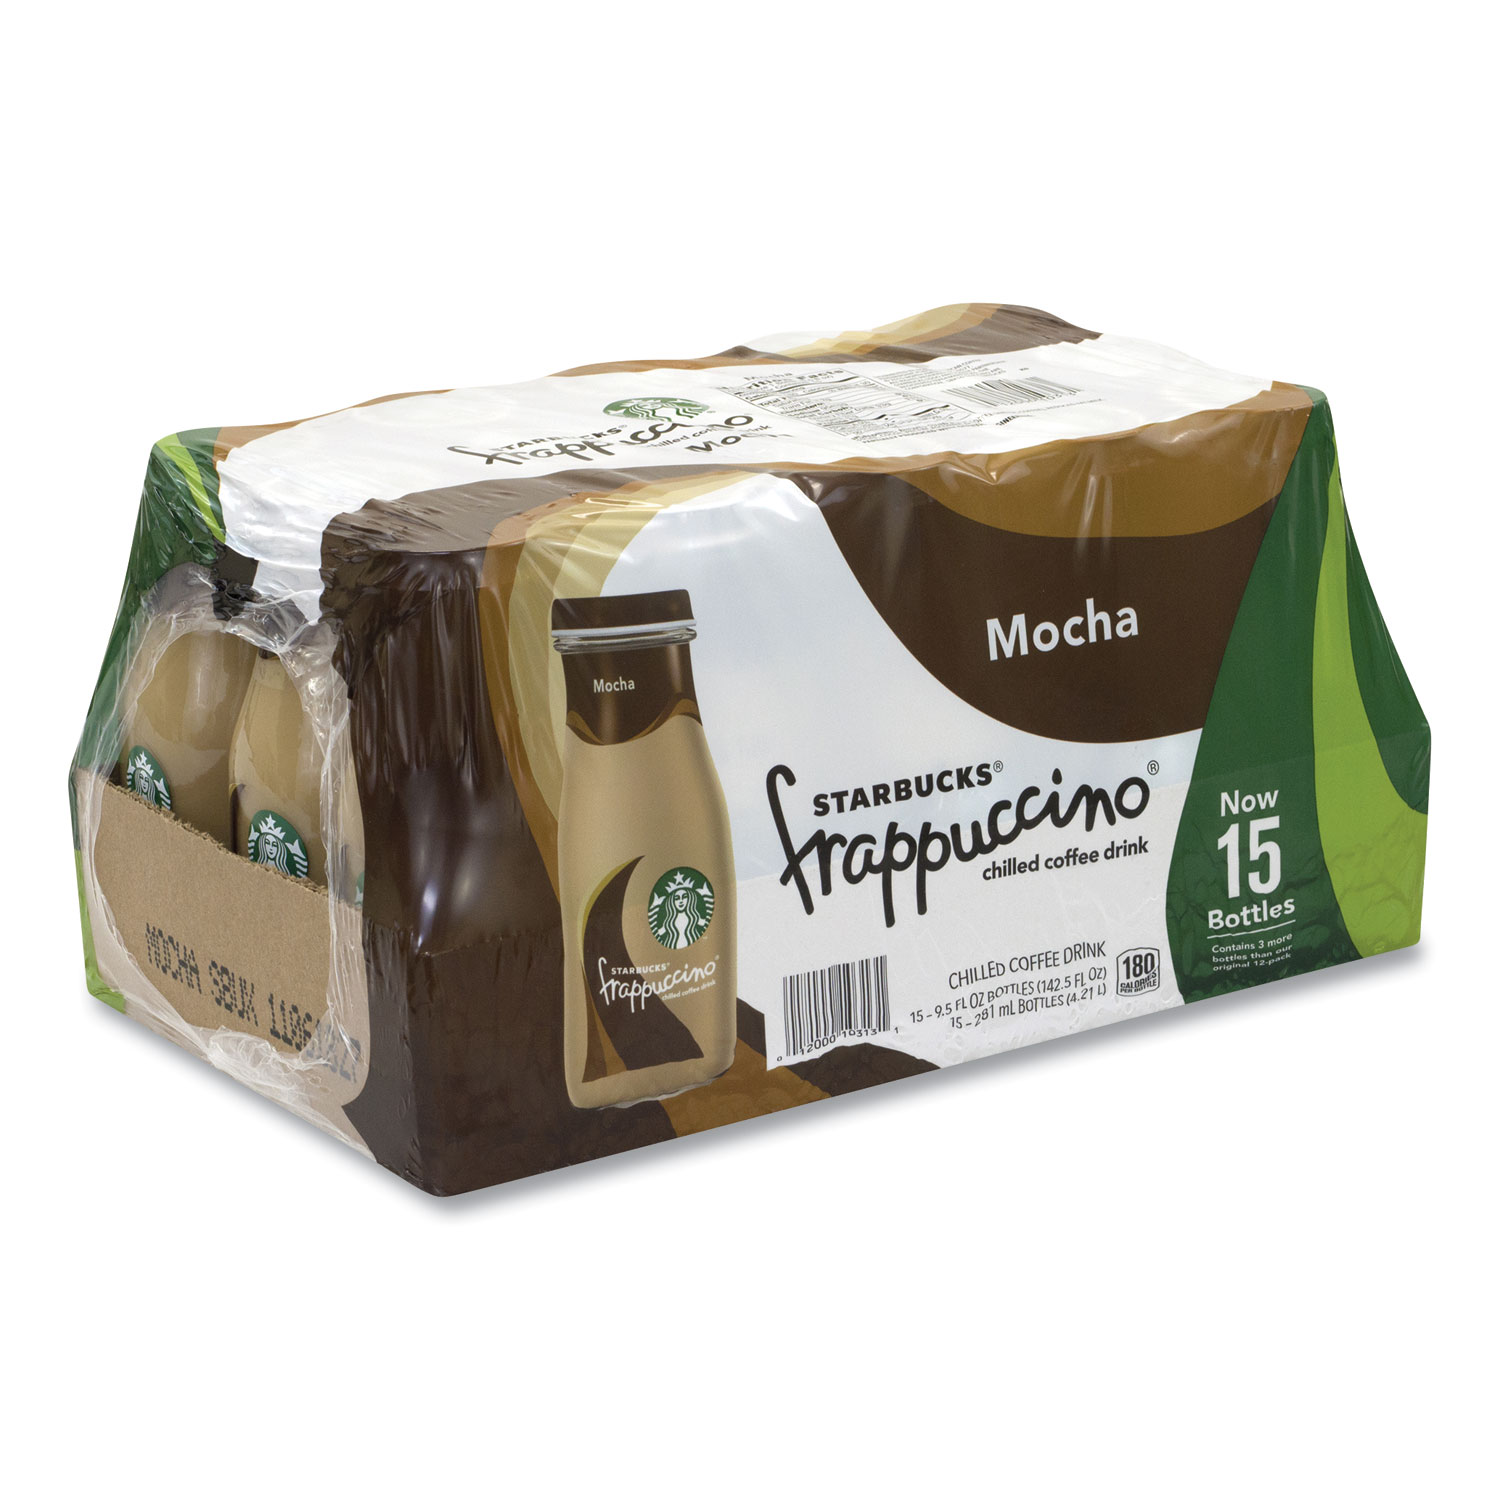  Starbucks 10313 Frappuccino Coffee, 9.5 oz Bottle, Mocha, 15/Pack, Free Delivery in 1-4 Business Days (GRR90000049) 